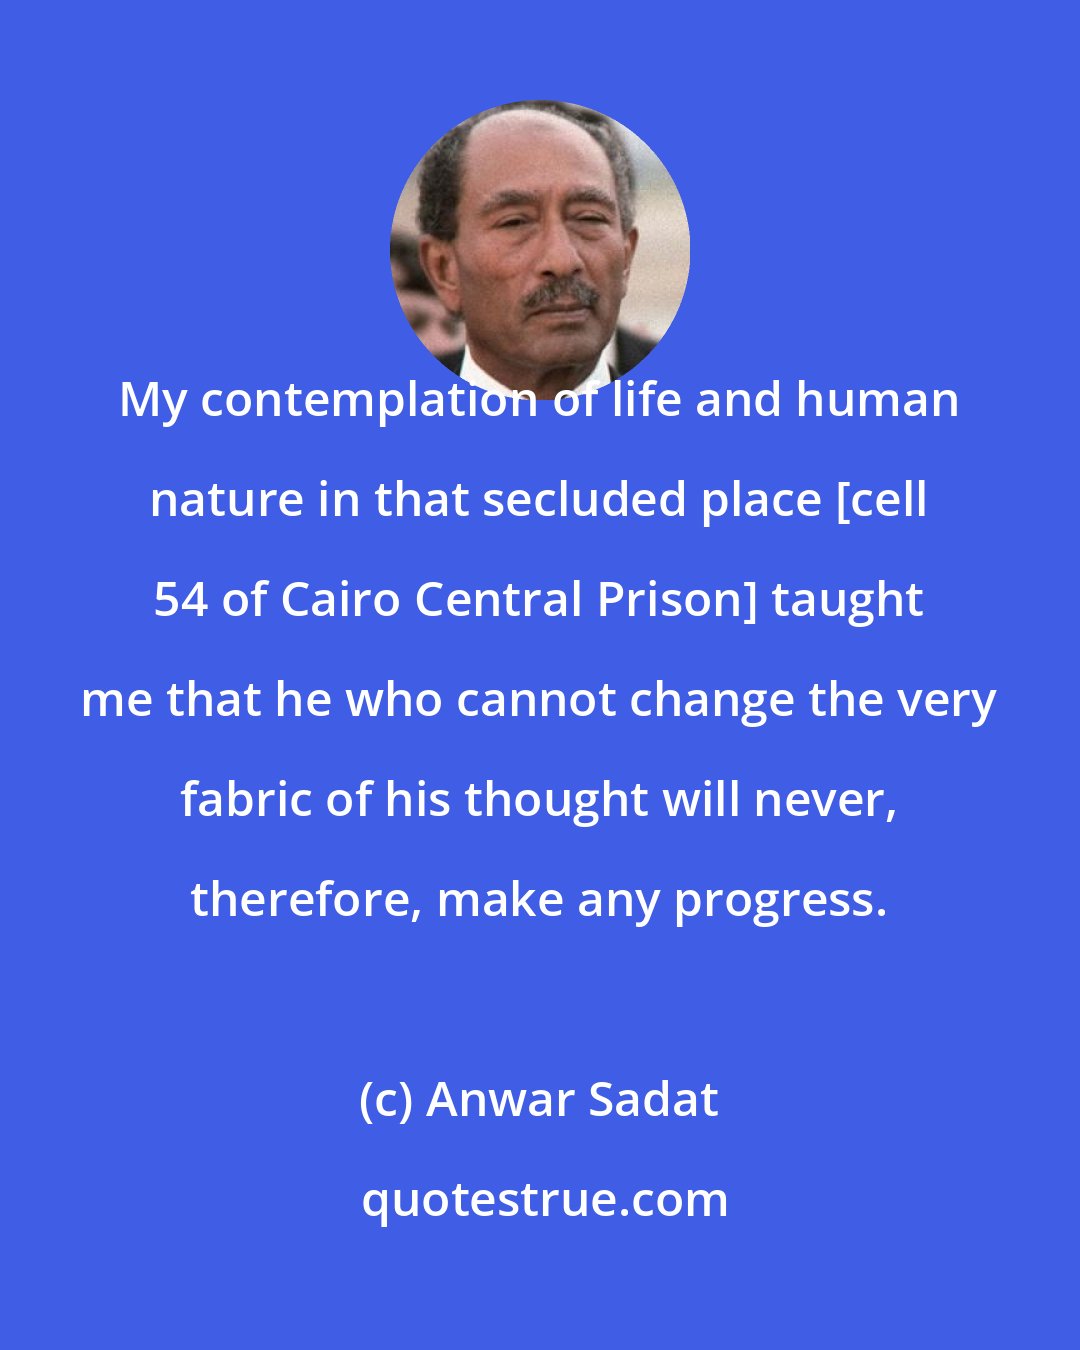 Anwar Sadat: My contemplation of life and human nature in that secluded place [cell 54 of Cairo Central Prison] taught me that he who cannot change the very fabric of his thought will never, therefore, make any progress.